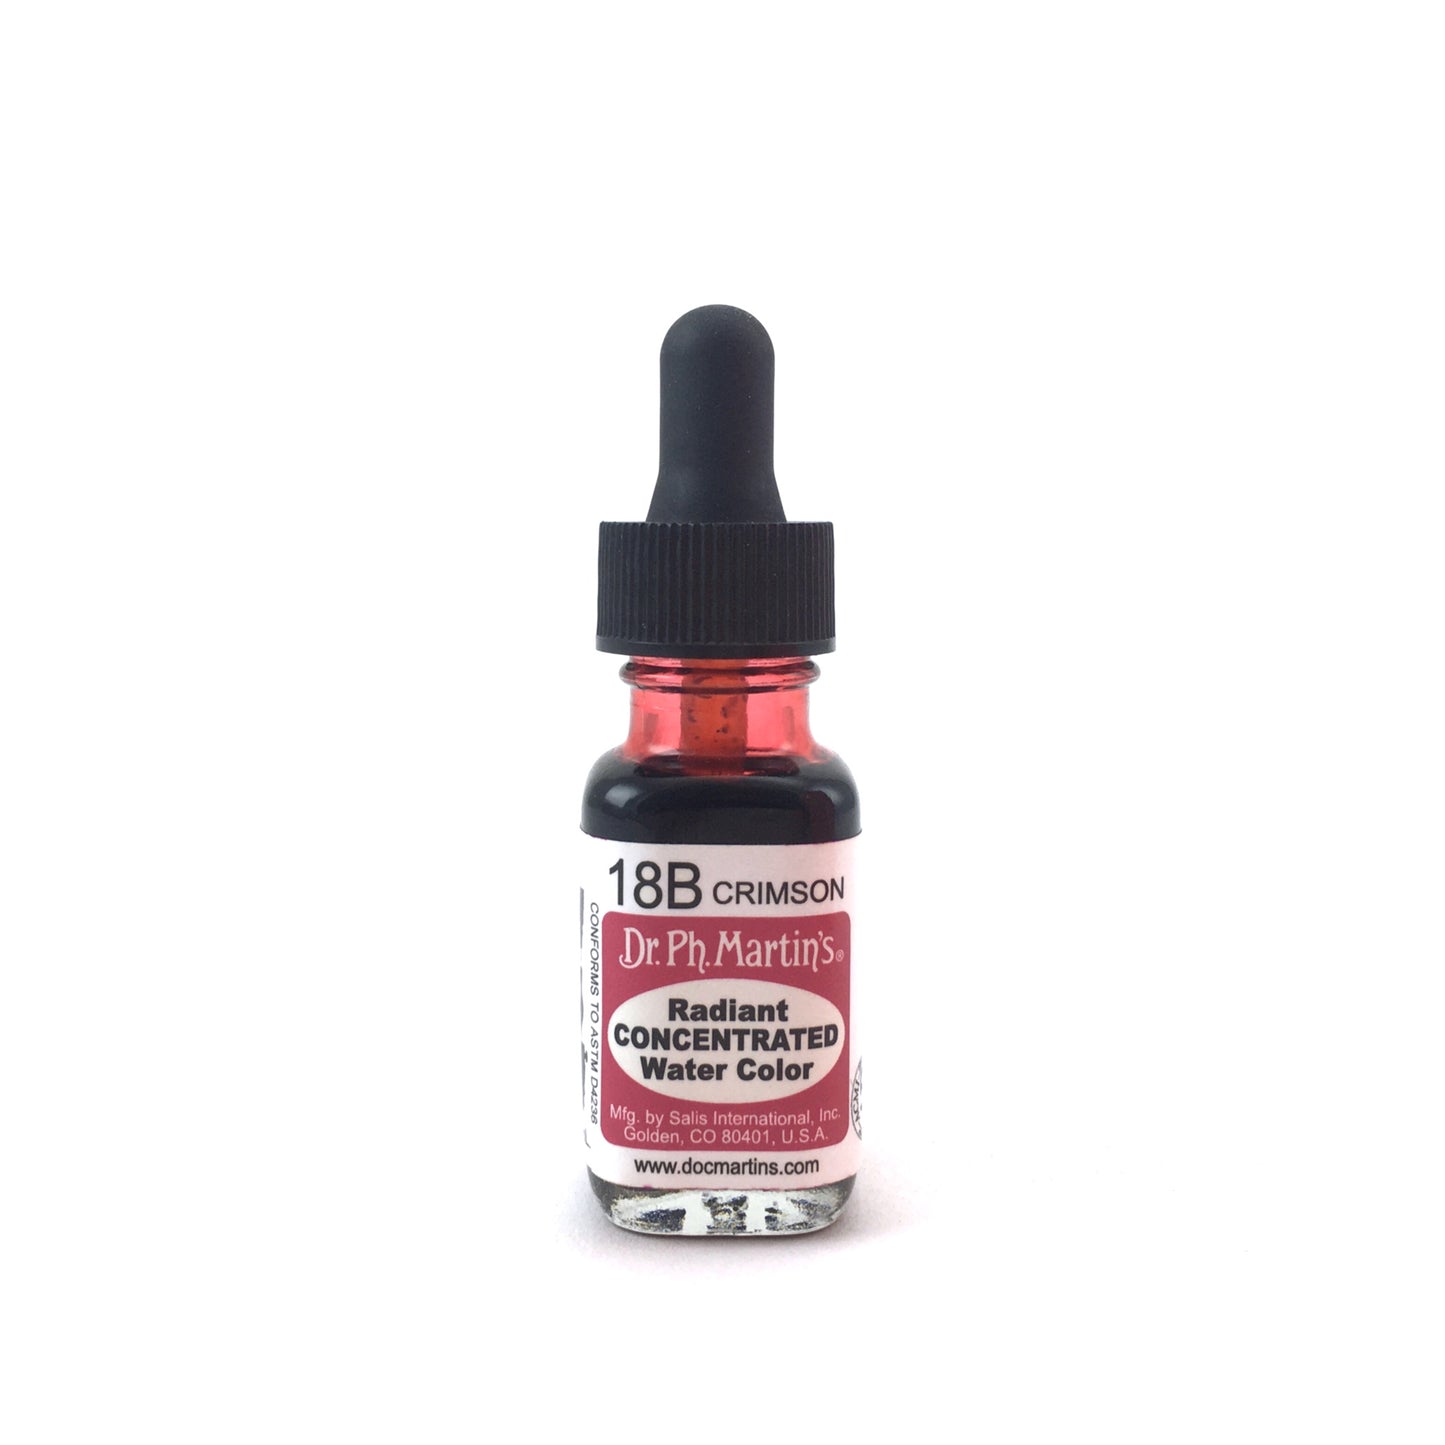 Dr. Ph. Martin's Radiant Concentrated Watercolor - .50 oz. - 18B - Crimson by Dr. Ph. Martin’s - K. A. Artist Shop